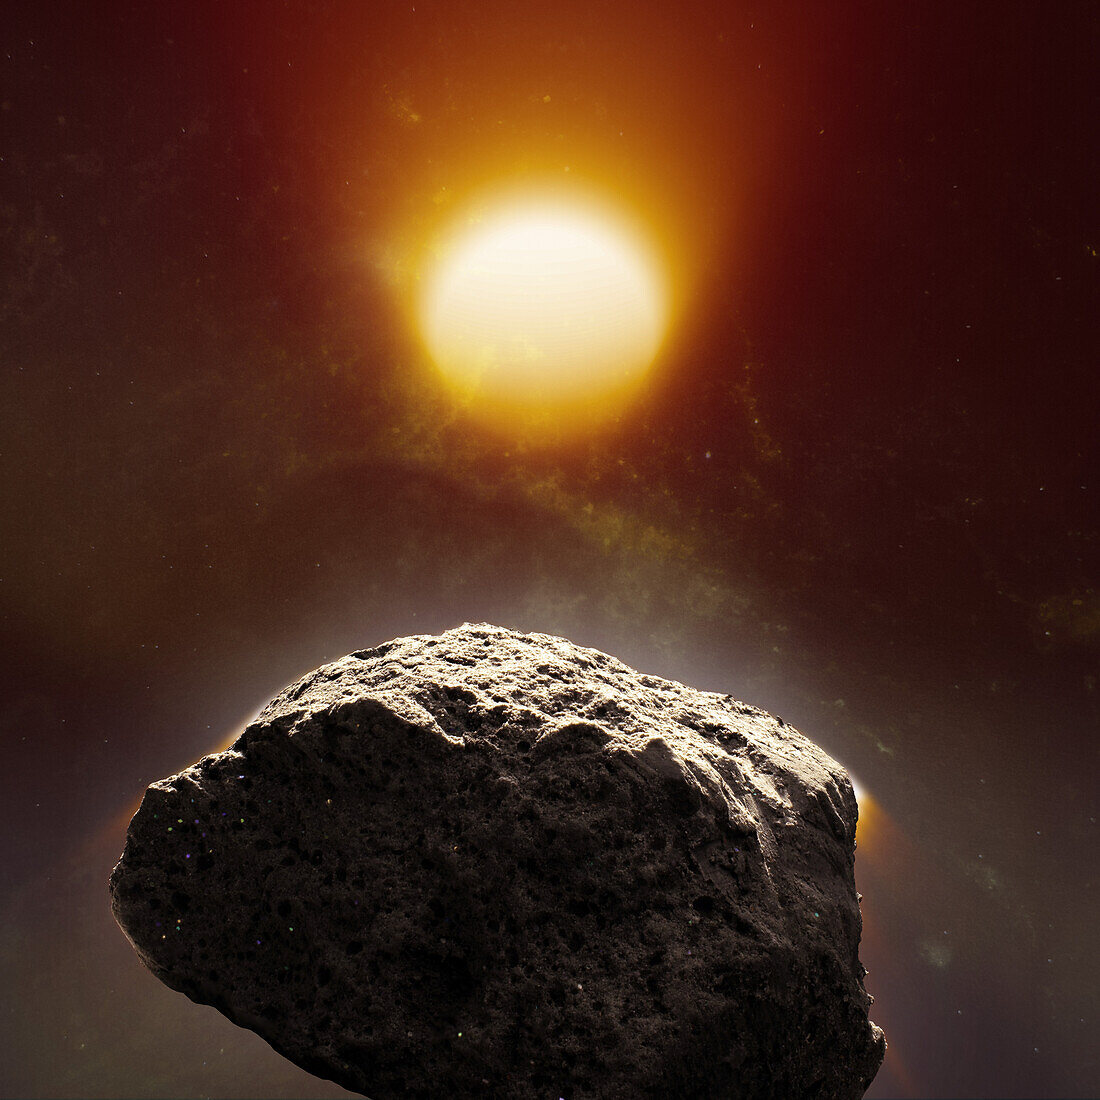 Asteroid and star, composite image